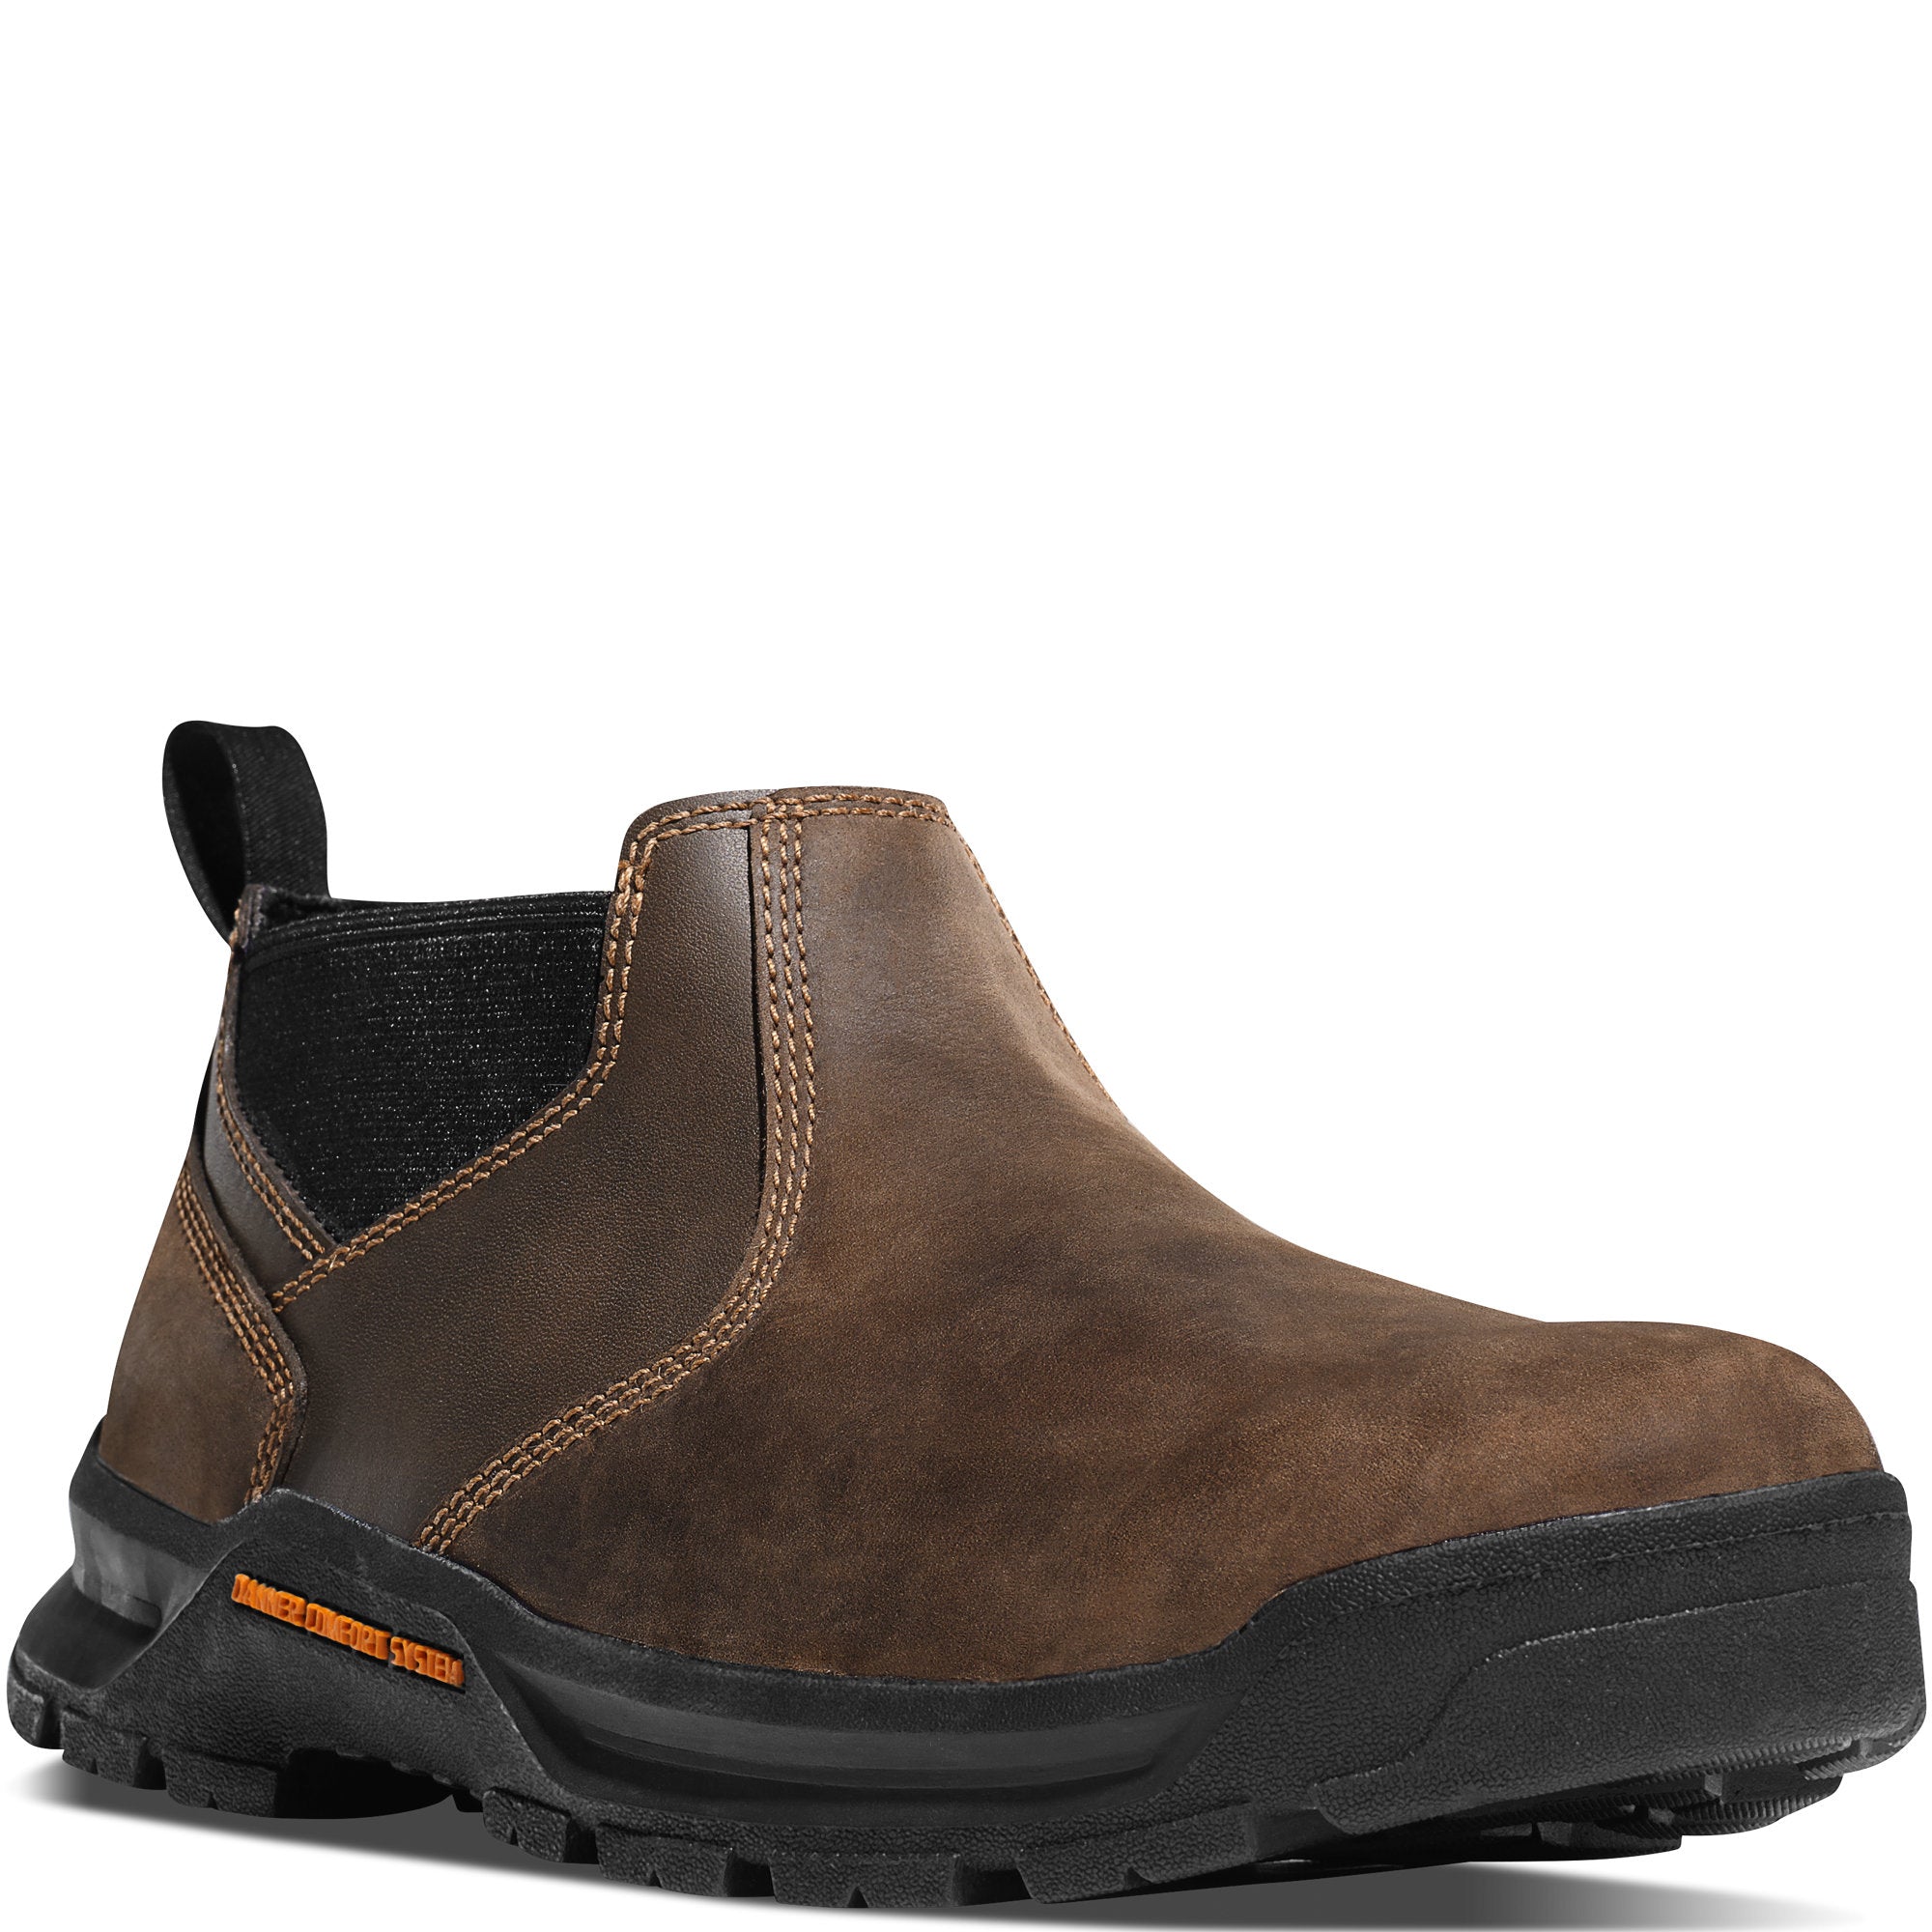 DANNER Crafter Romeo 3" Shoe